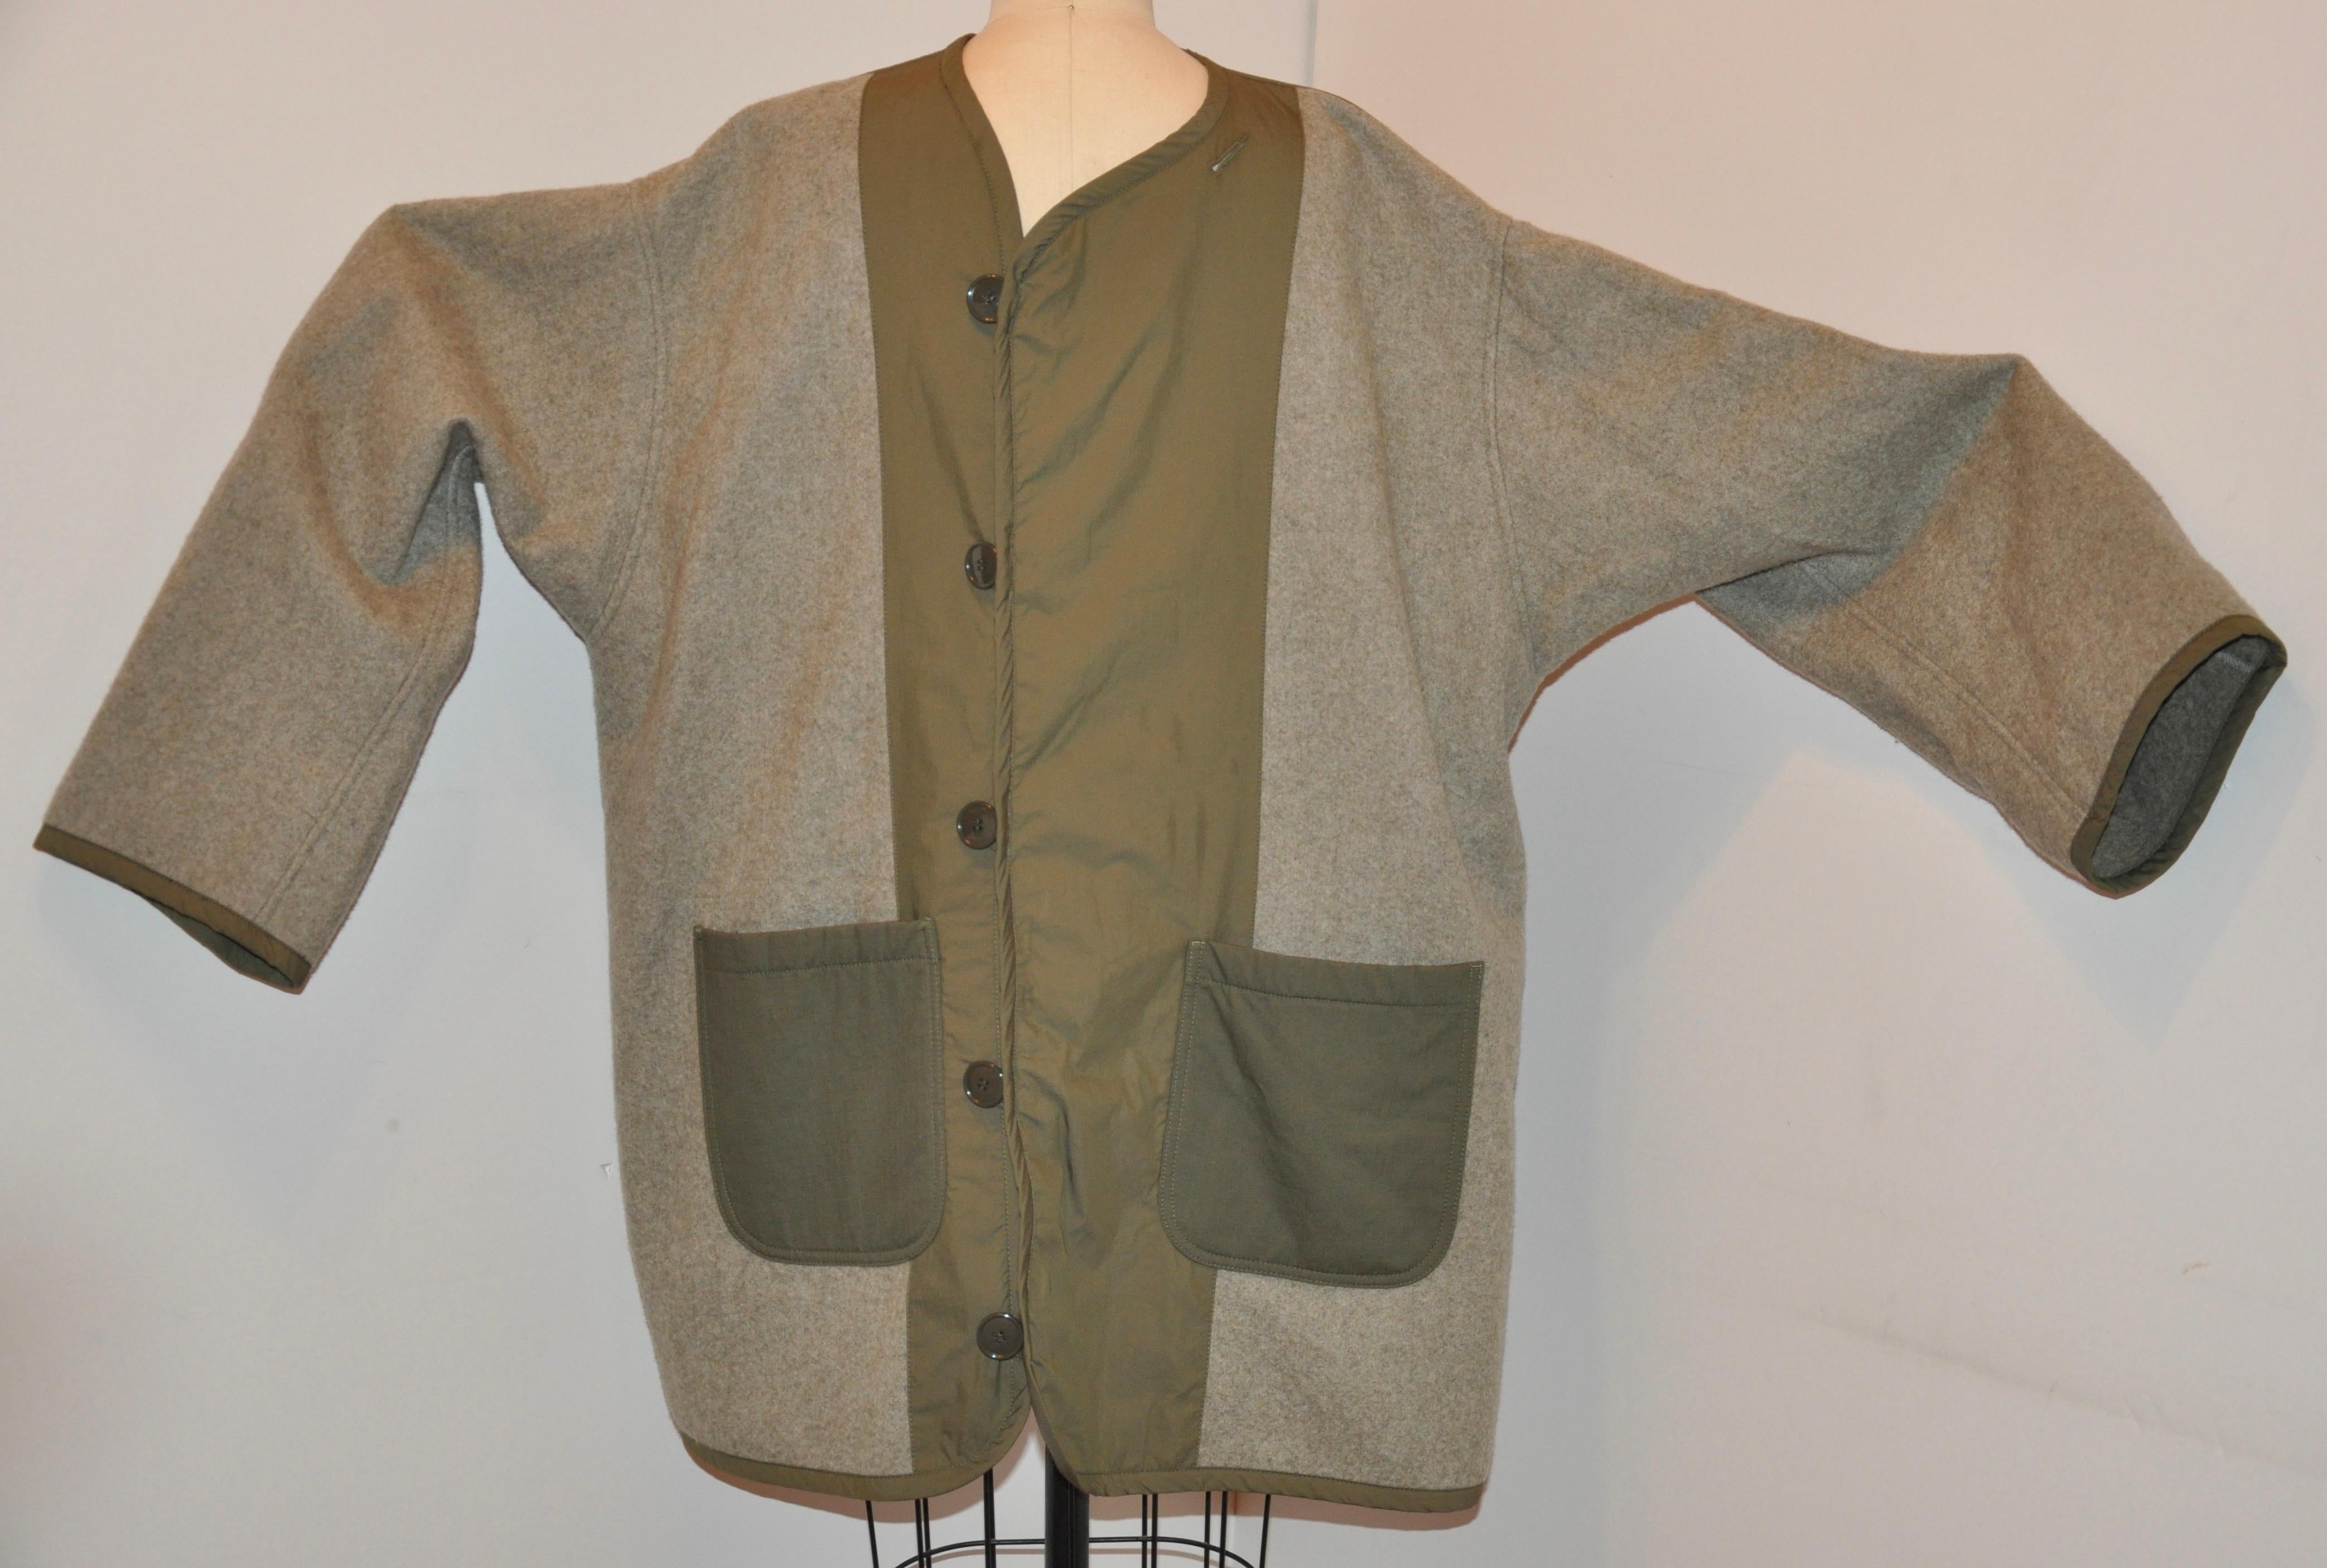 Junya Watanabe / Comme des Garcon oversized woollen detailed with khaki jacket features domain sleeves and dropped shoulders. The front has five buttons for closure and two huge patch pockets as well. Along the sleeves elbow are detailed gently